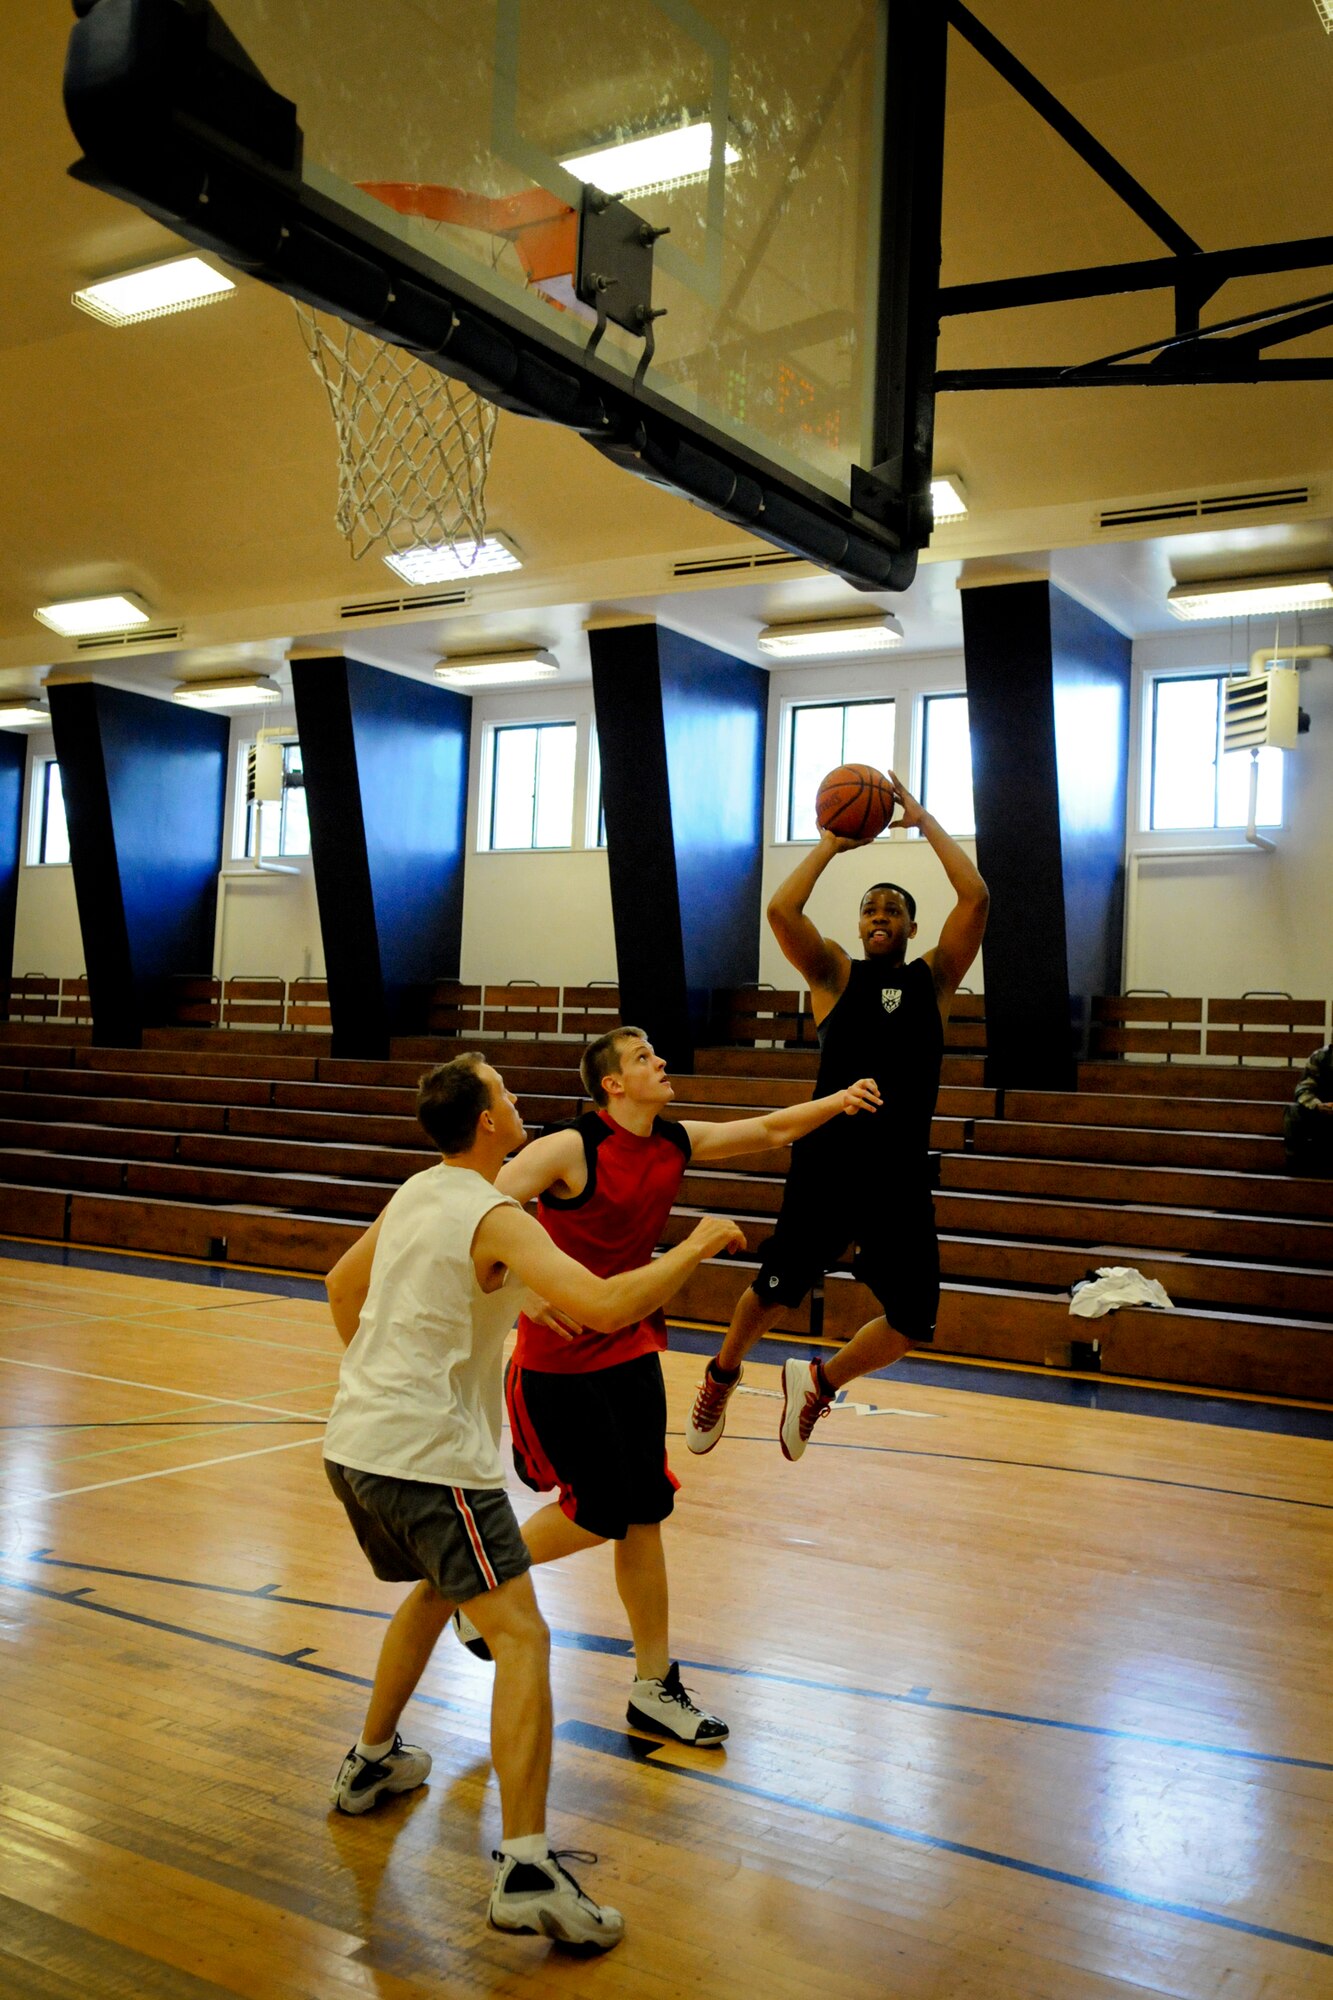 MISAWA AIR BASE, Japan -- Gregory Richardson attempts a jump shot during a 3-on-3 basketball tournament at the Potter Fitness Center May 27, 2009. The tournament was one of the many events hosted by the Potter Fitness Center during May Fitness Month. (U.S. Air Force photo by Senior Airman Jamal D. Sutter)